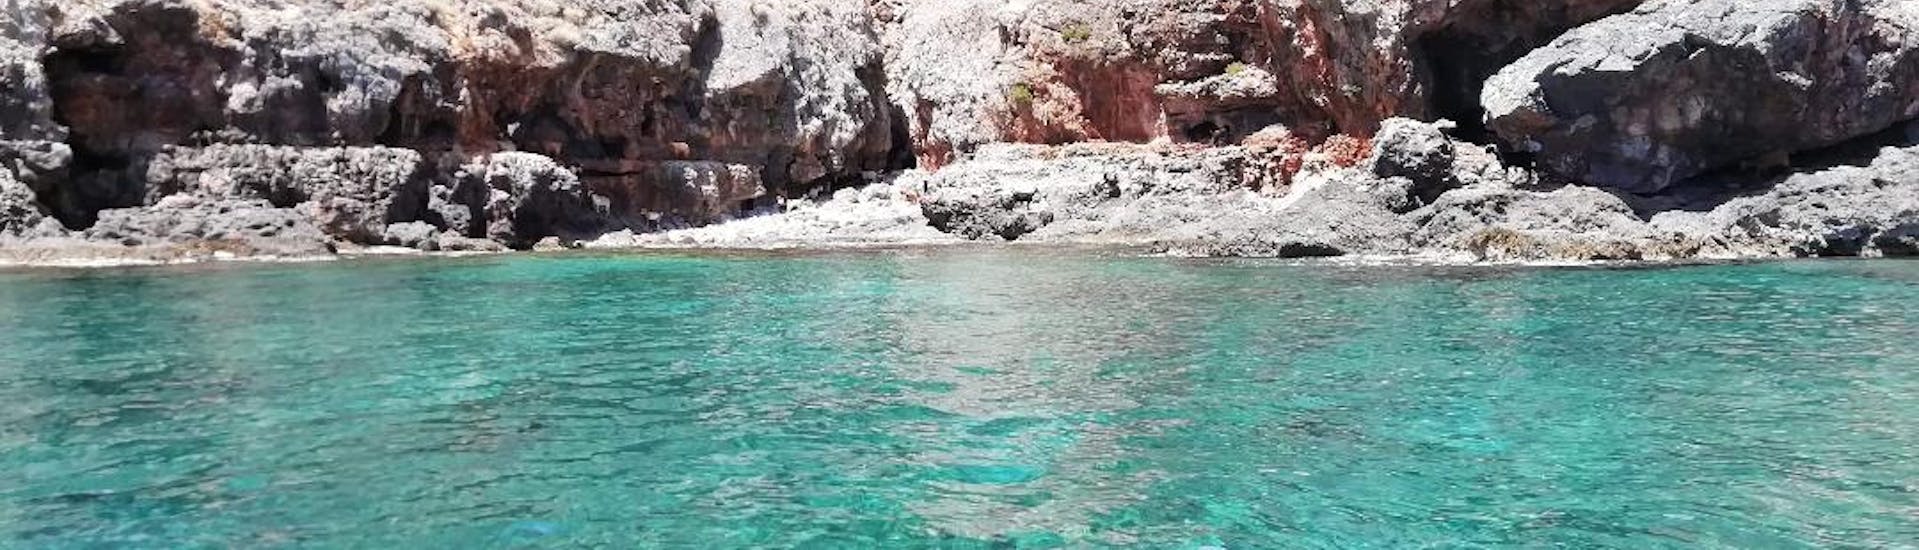 The rocky coast of Antikythira which you can see during the Private Boat Trip to the Balos Lagoon & Antikythira with Chania Balos Cruises.